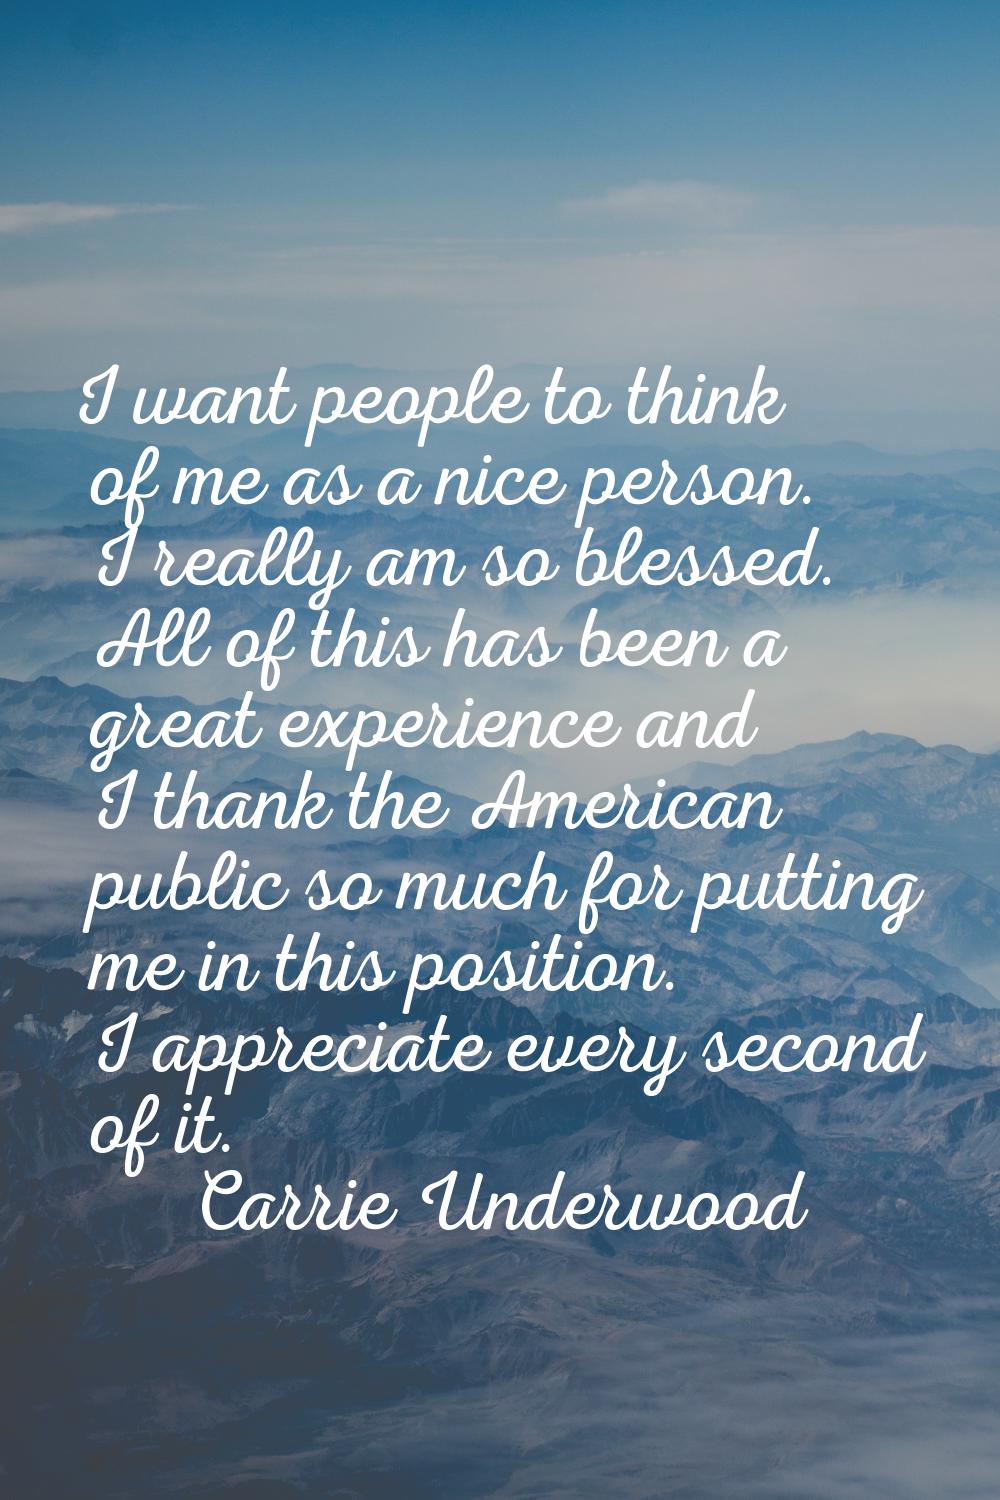 I want people to think of me as a nice person. I really am so blessed. All of this has been a great